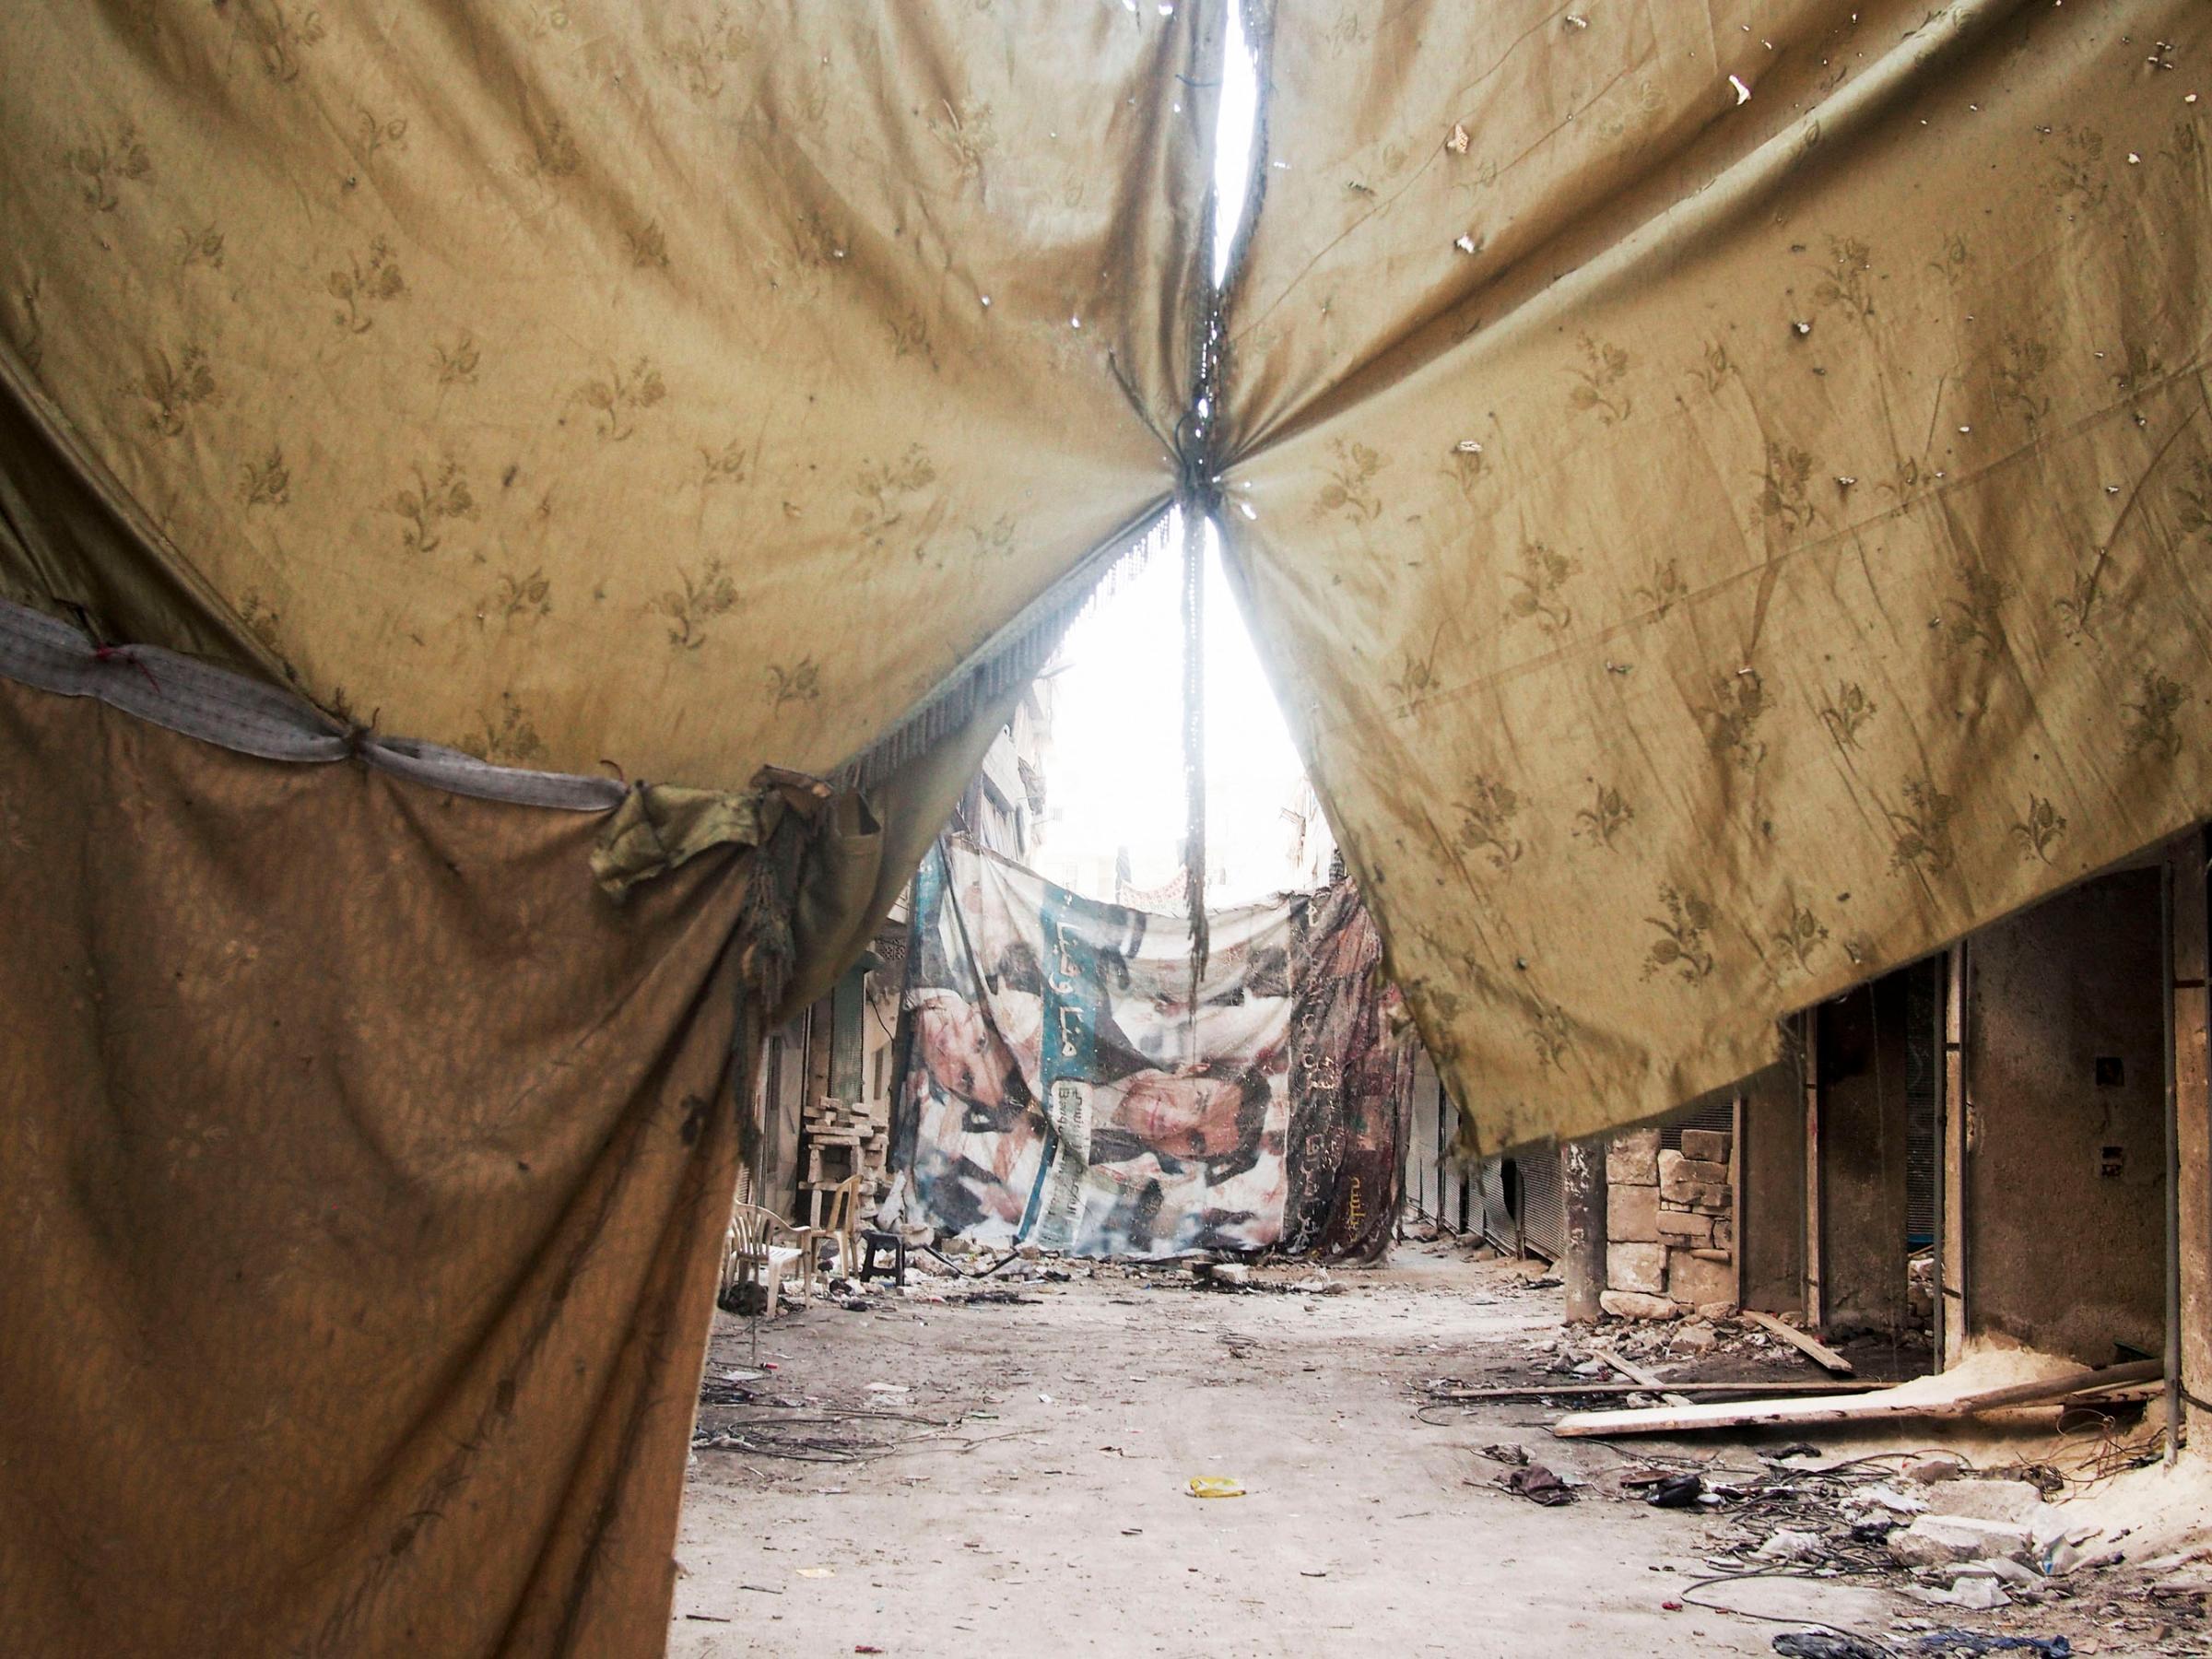 SYRIA. Aleppo. March 23, 2013. Makeshift sheets and blankets sewn together obstruct the view from regime snipers in the Al-Amiriya front line of city.